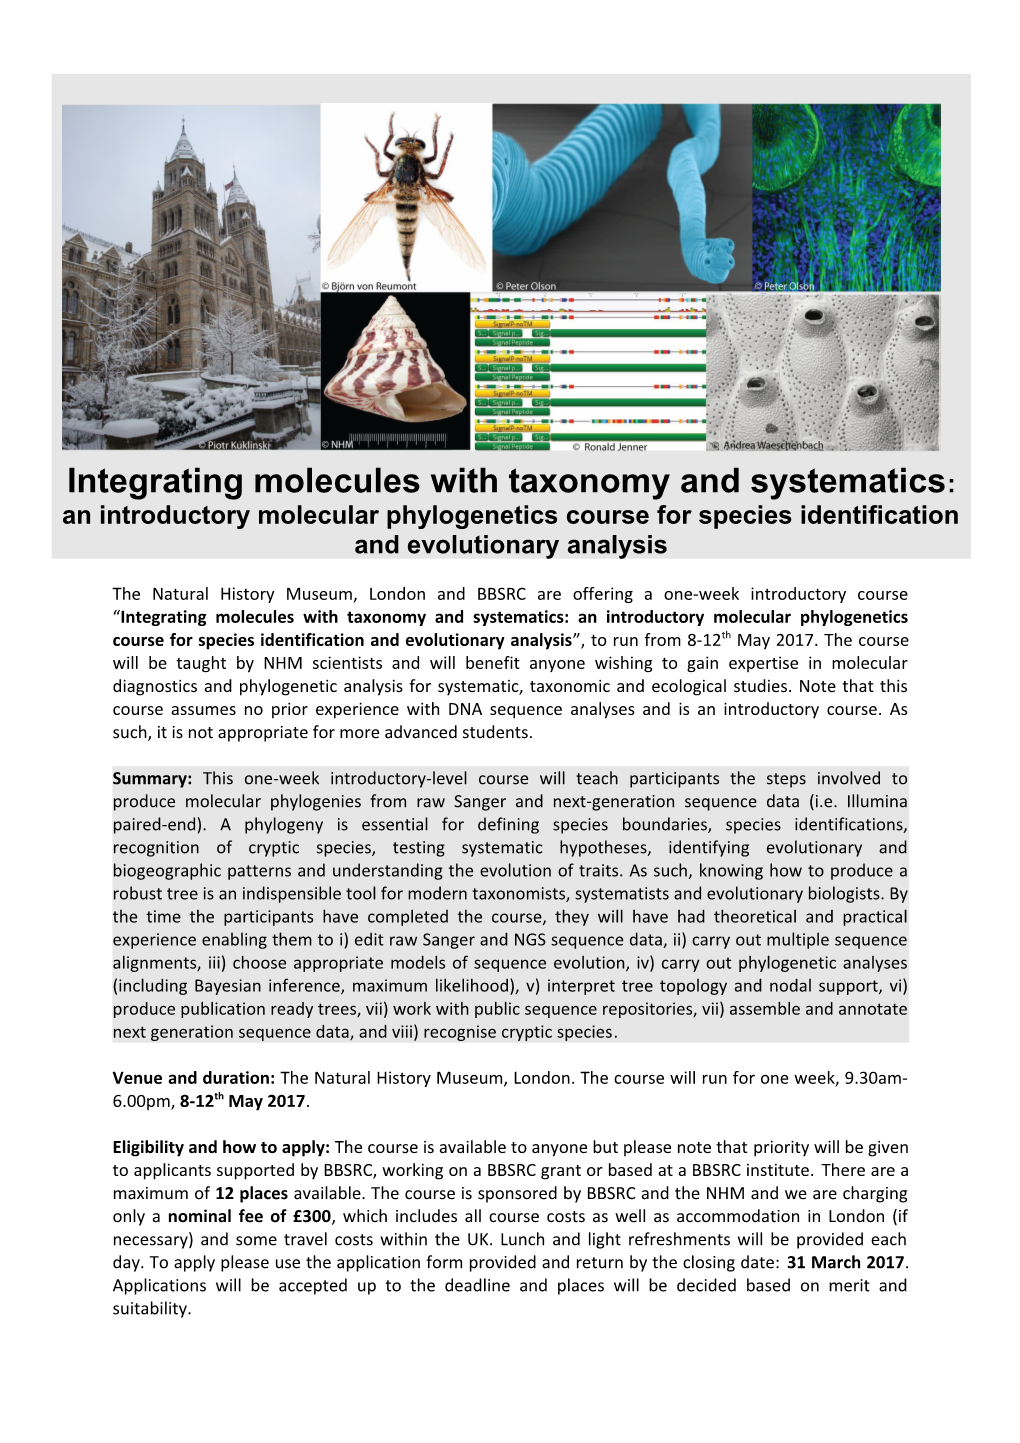 Integrating Molecules with Taxonomy and Systematics: an Introductory Molecular Phylogenetics